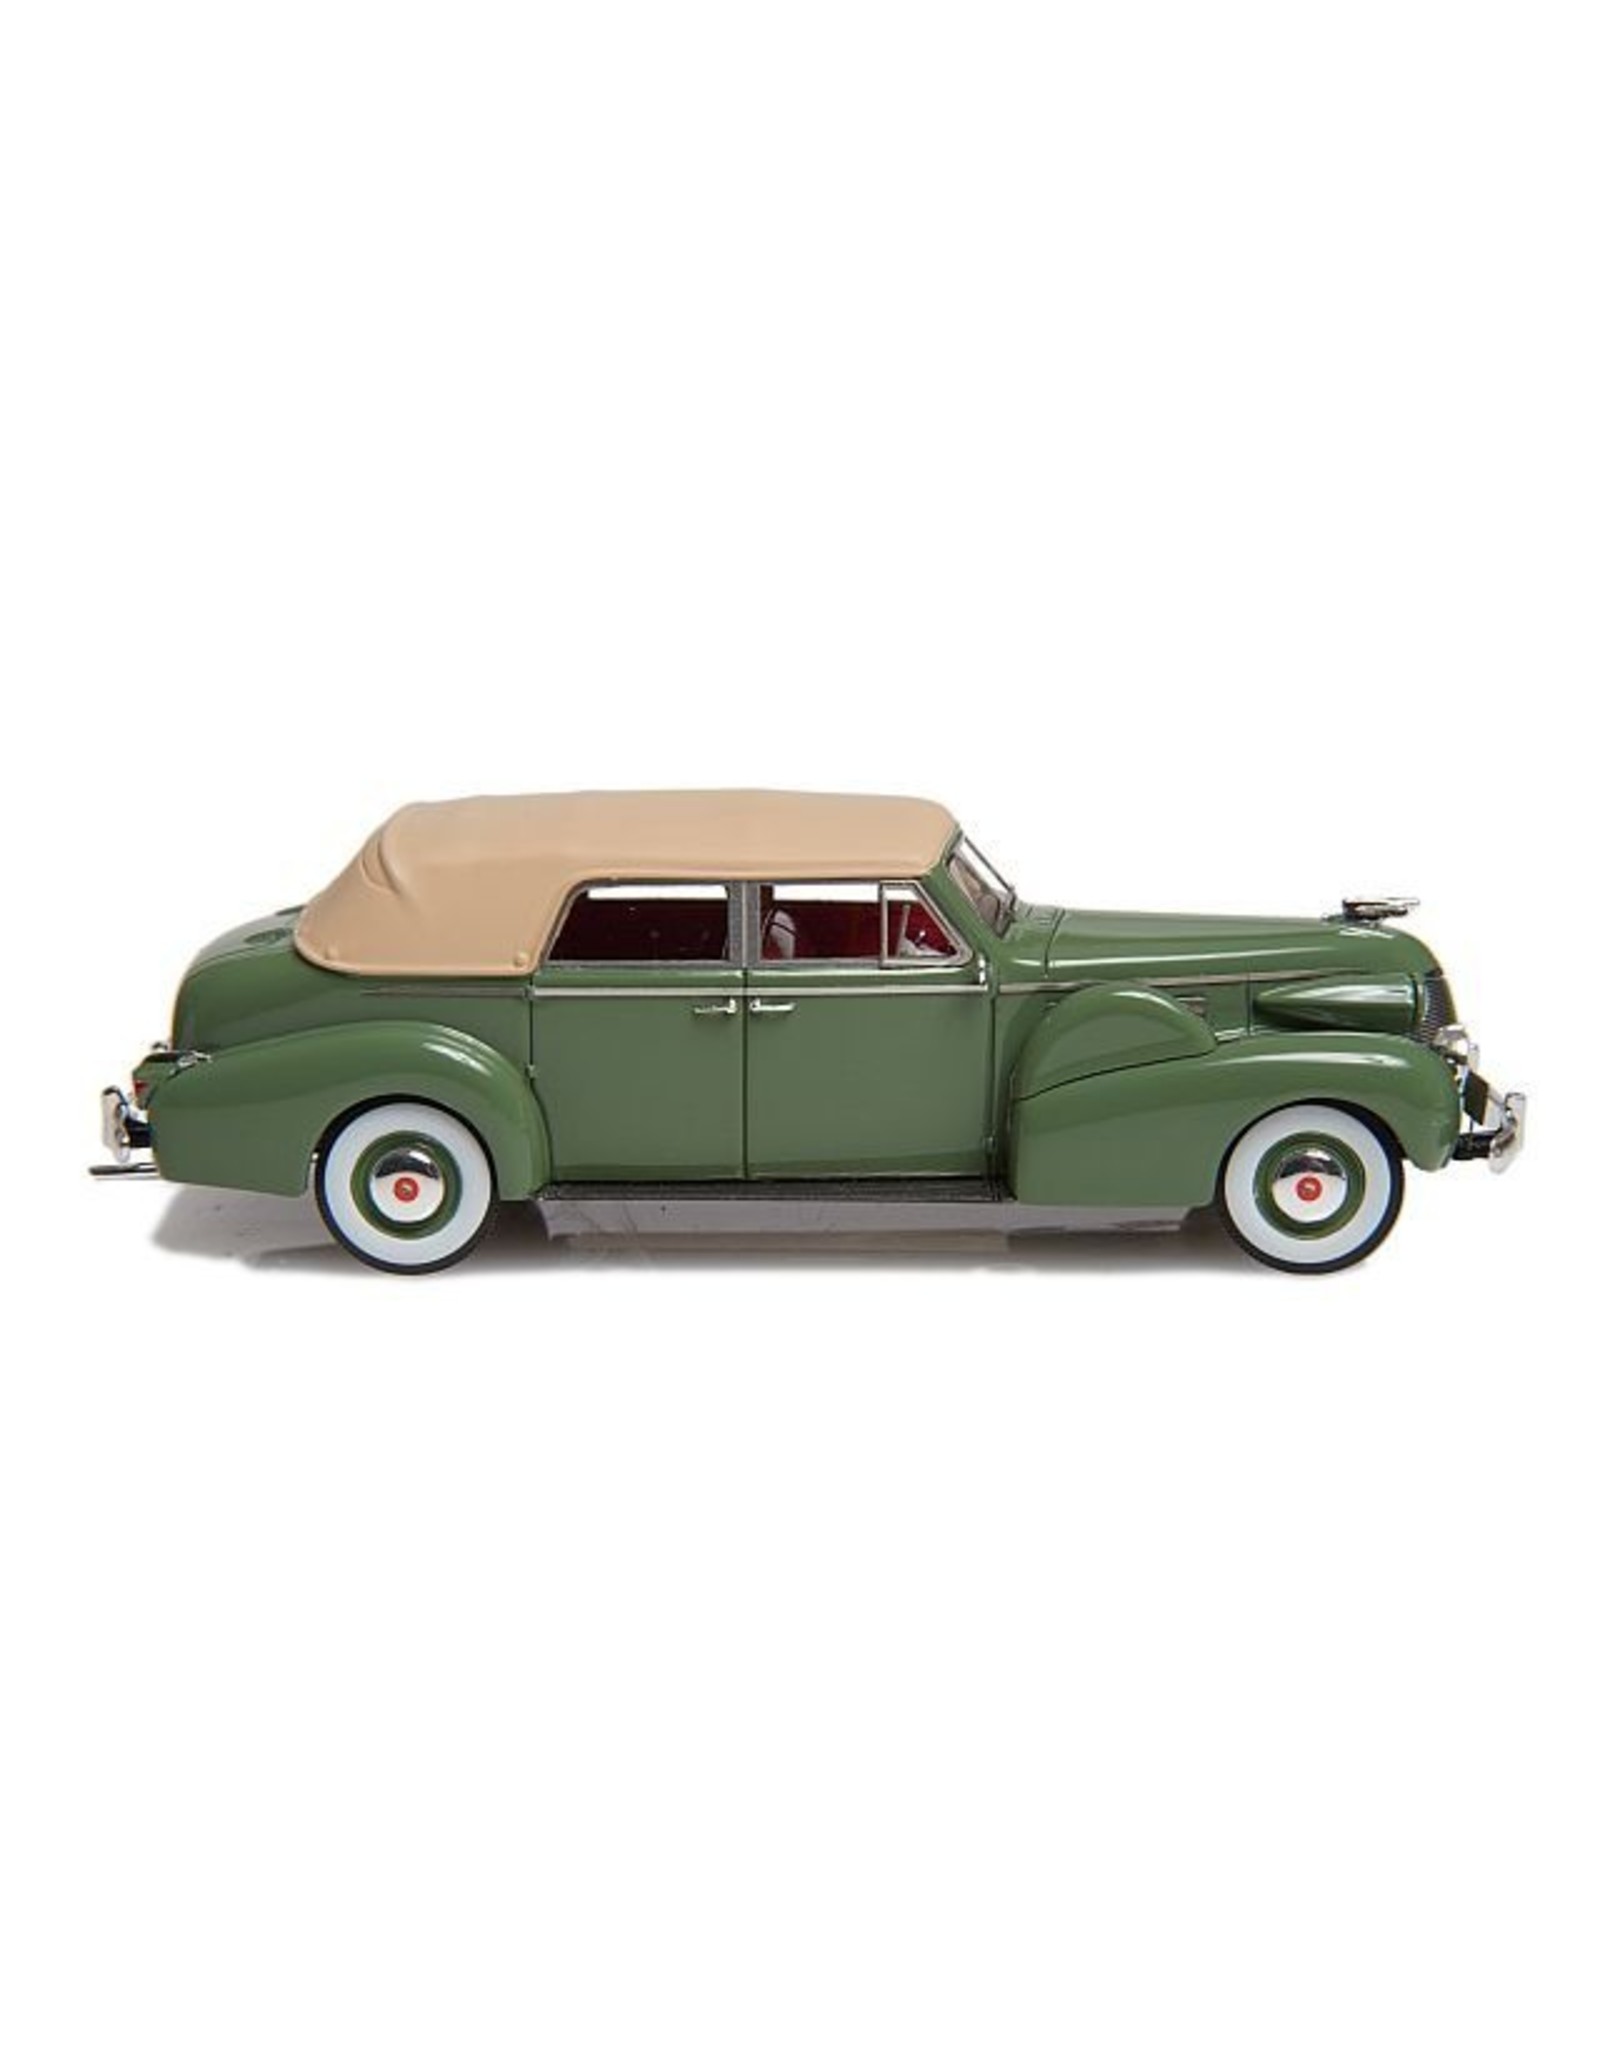 Cadillac by Fleetwood. CADILLAC SERIE 75 CABRIOLET BY FLEETWOOD(1939)closed roof-green